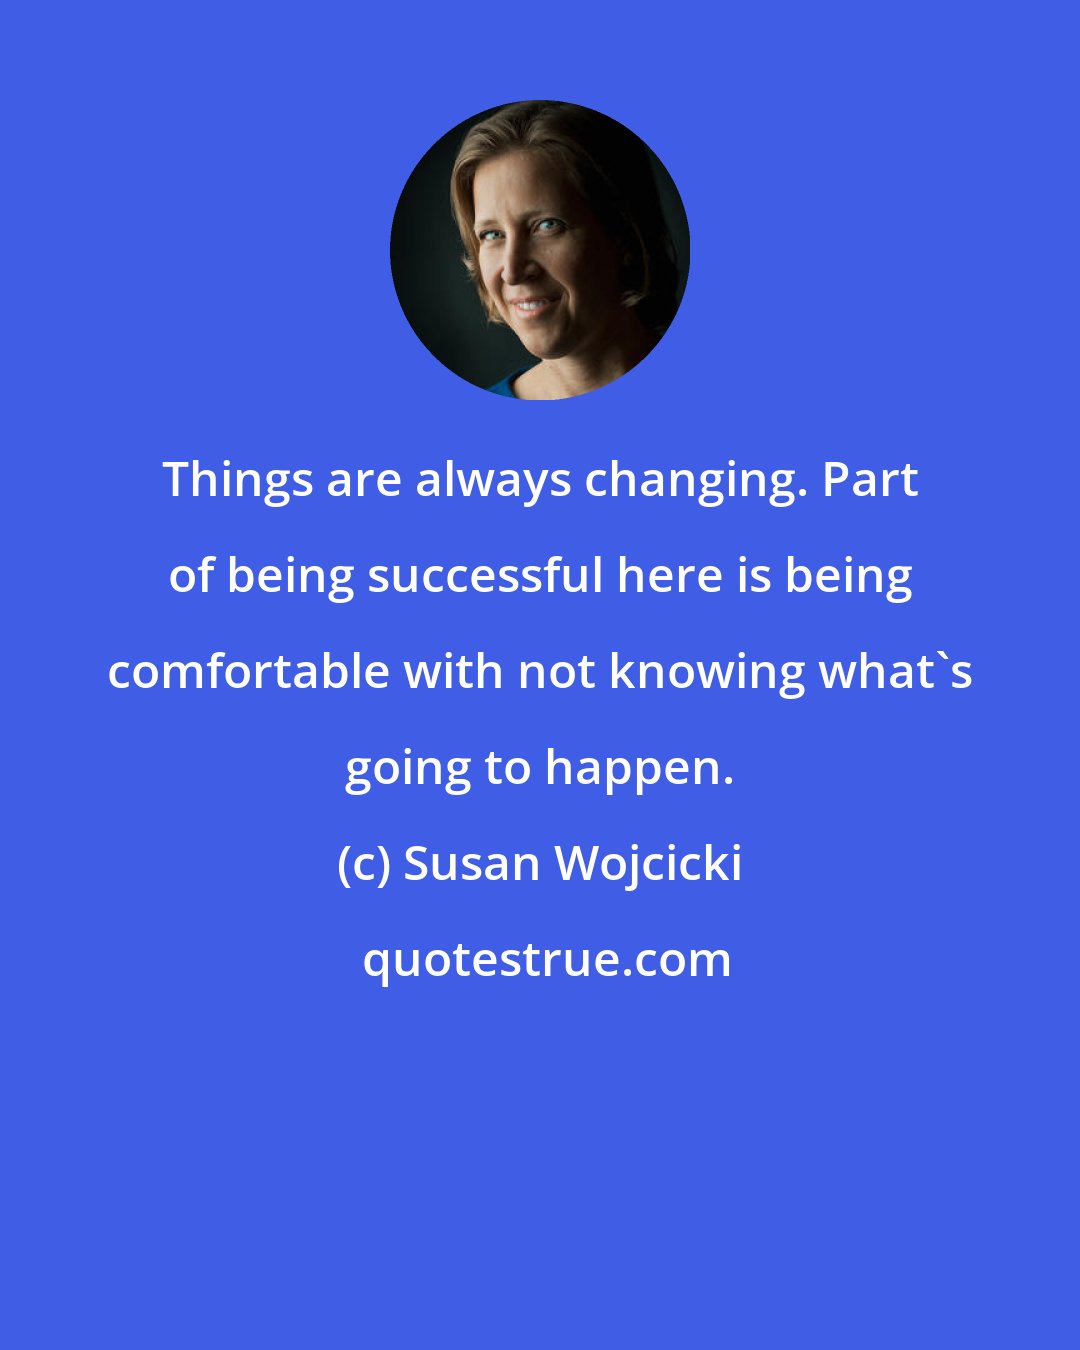 Susan Wojcicki: Things are always changing. Part of being successful here is being comfortable with not knowing what's going to happen.